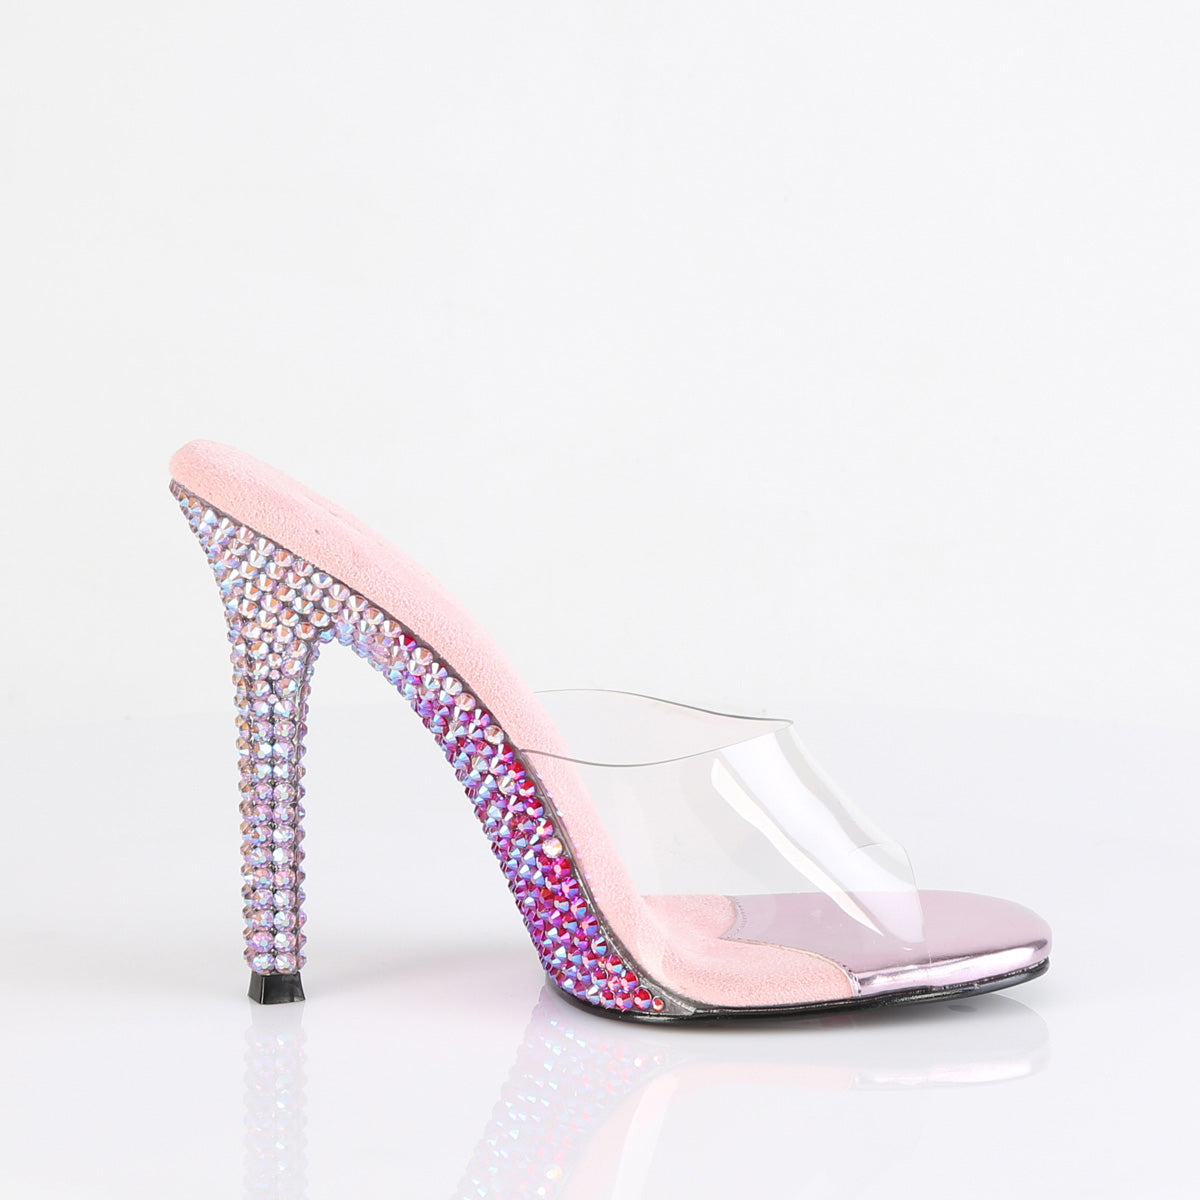 GALA-01DMM Two Tone Slide High Heel Pink & Clear Multi view 2